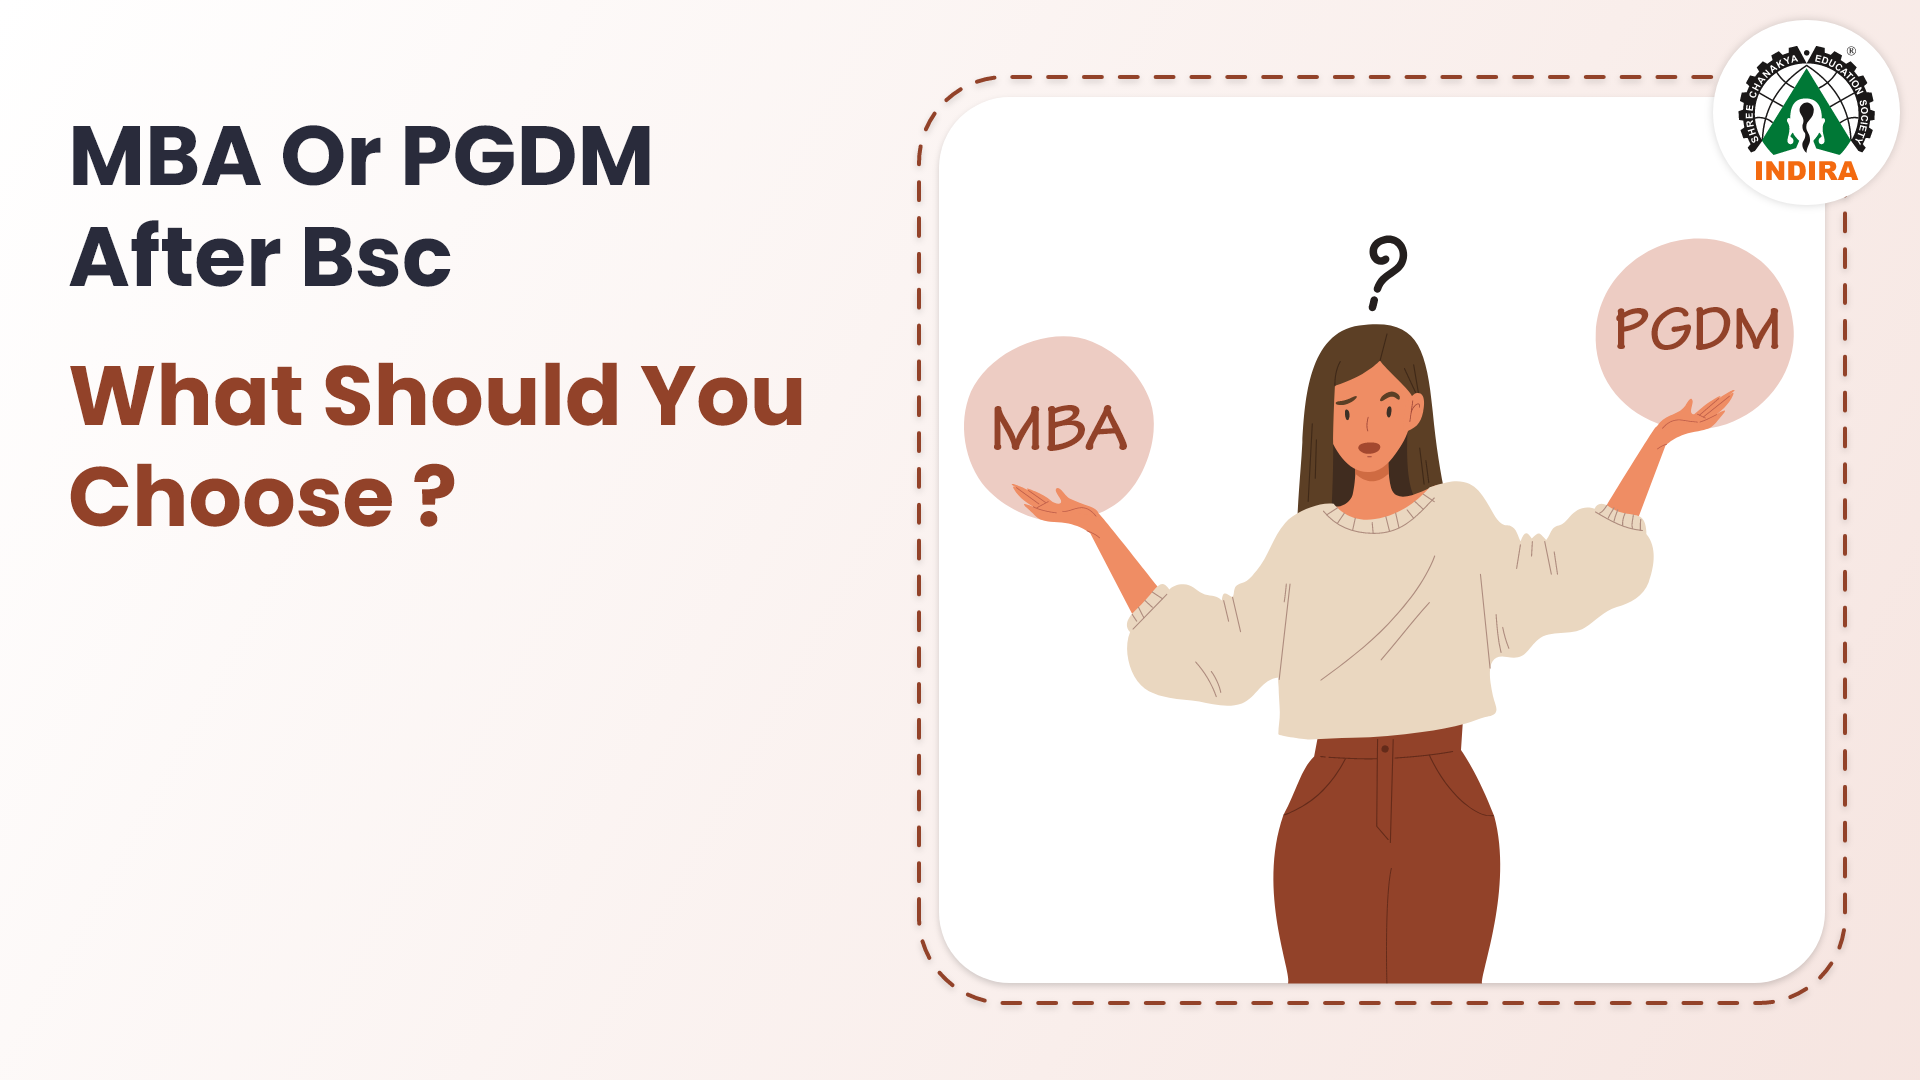 Should you choose MBA/PGDM after BSc?